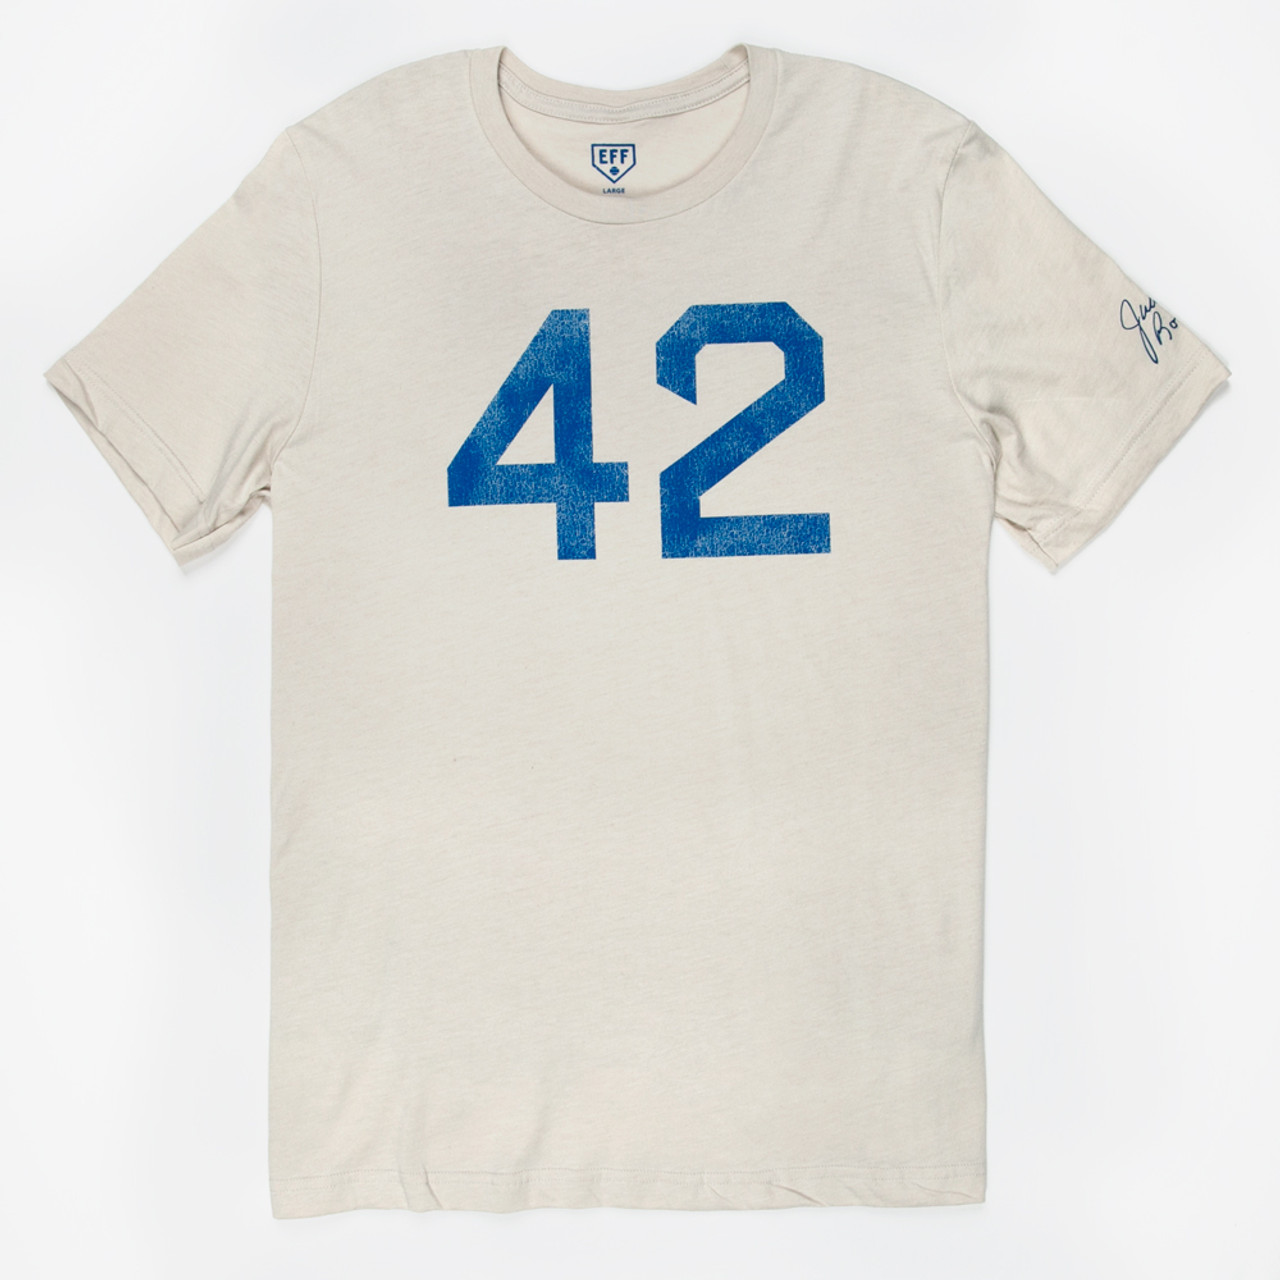 Number 42 - jersey number of Jackie Robinson - the only number to